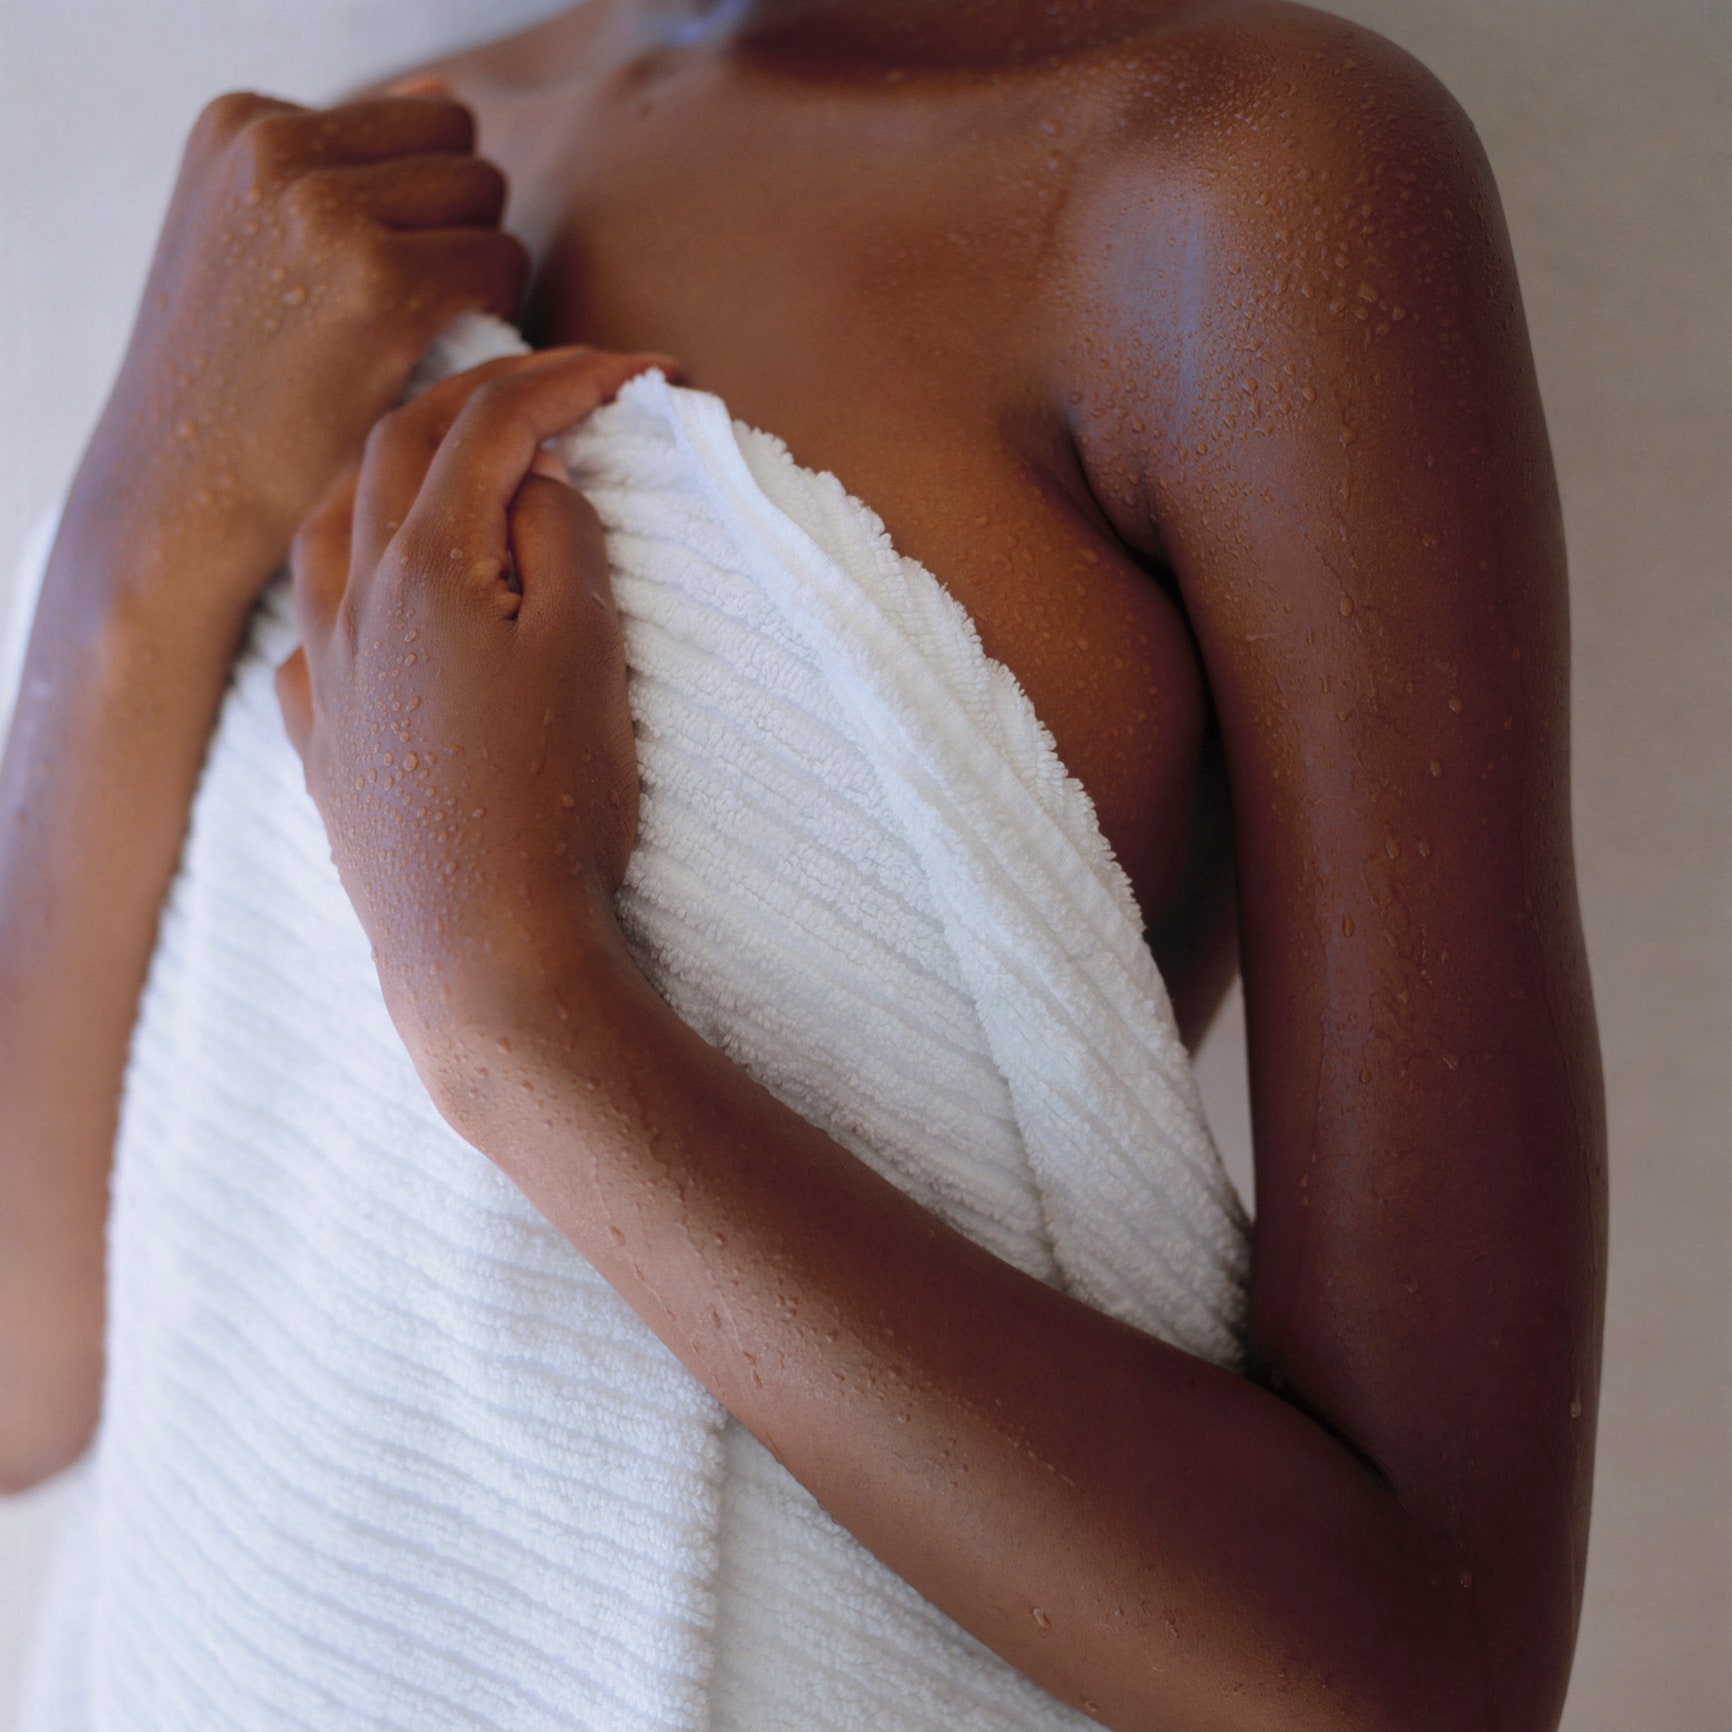 21 Bath Towels That Feel as Luxurious as They Look